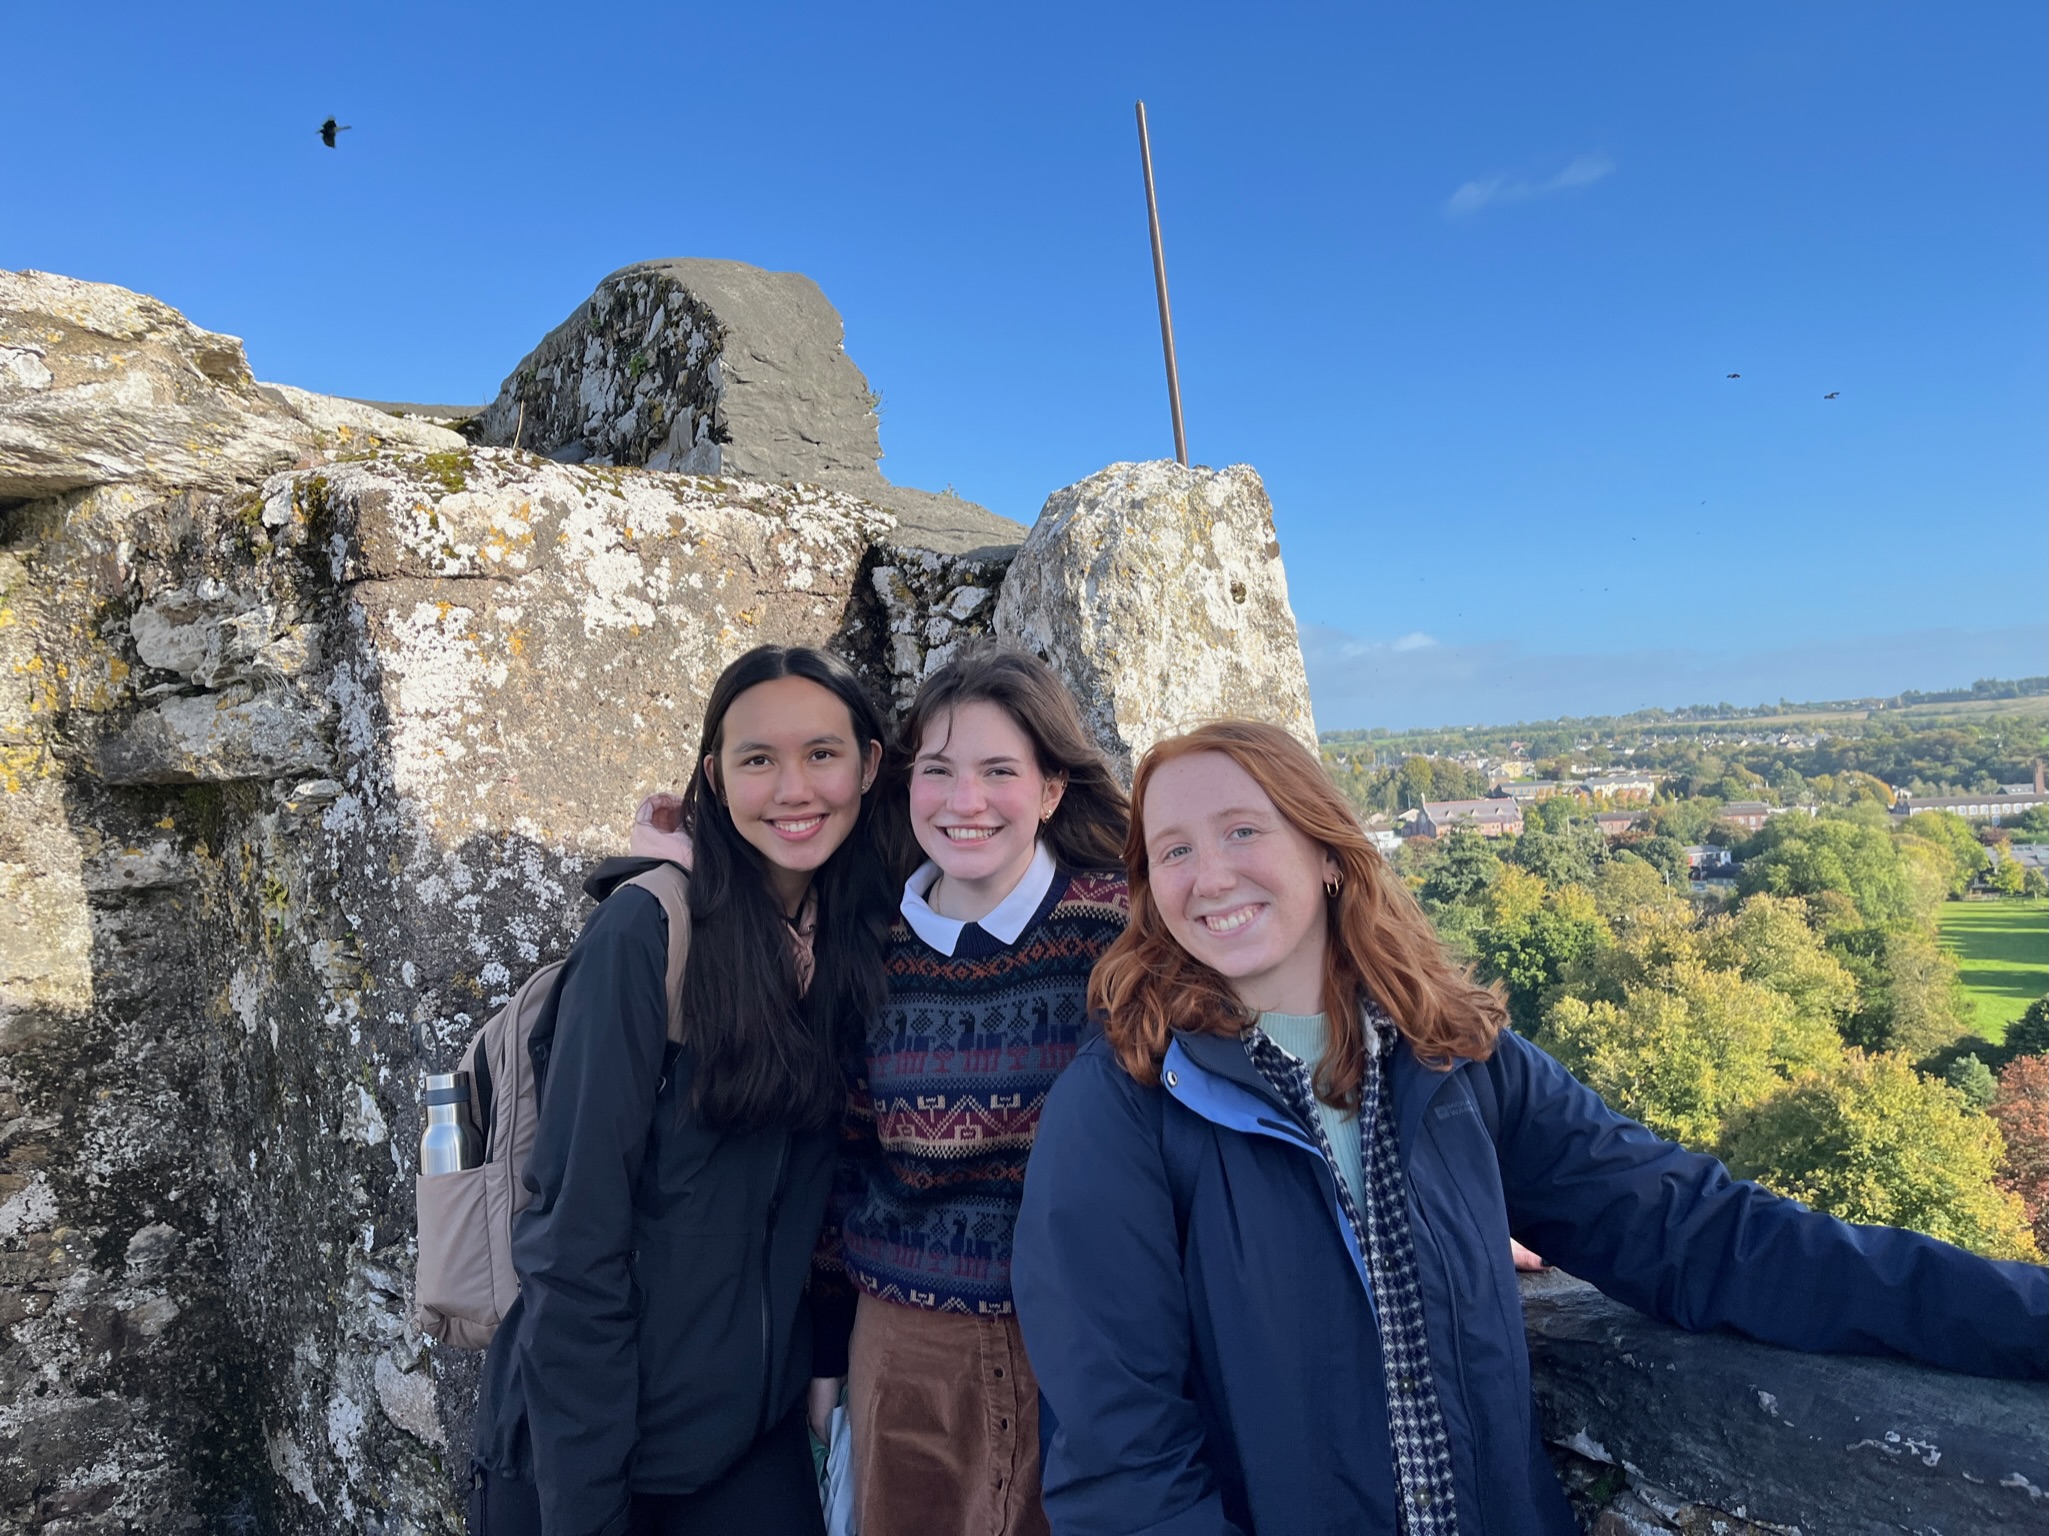 Some of my friends and I at Blarney Castle in Cork, Ireland! Day trips by plane/train are pretty affordable and many countries are only a 1-2 hour flight away.